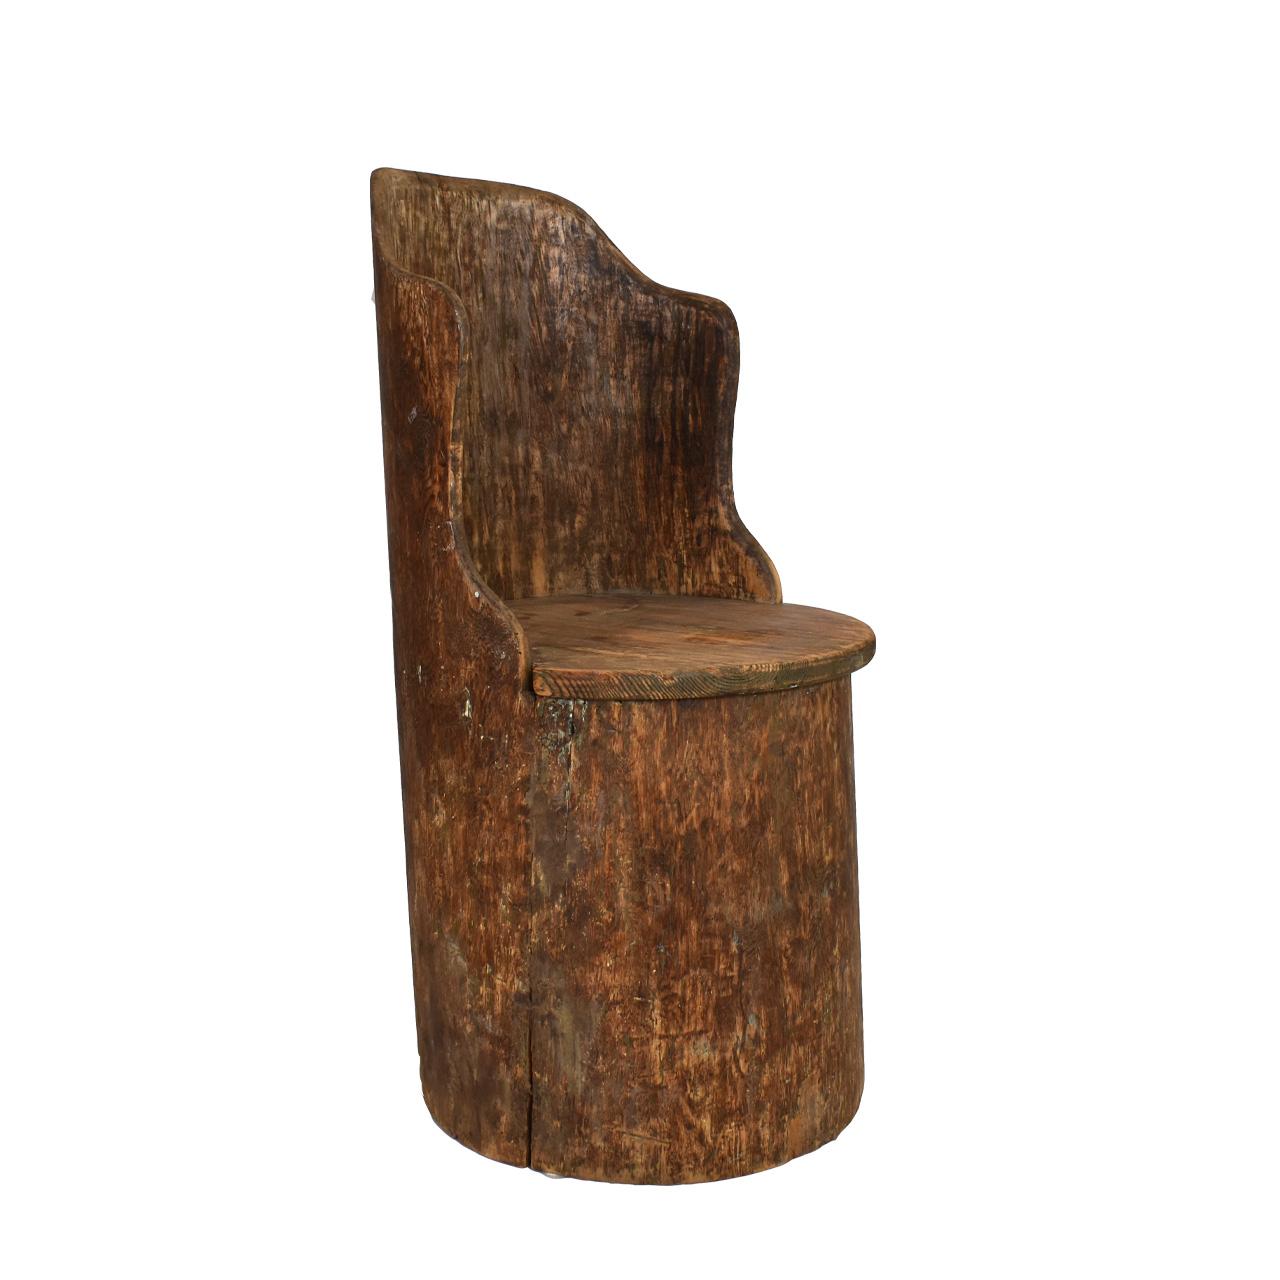 A Swedish Kubbestol chair carved from a tree trunk. The bottom is hollowed and top carved to make the back. Seat is removable so it can be used for storage. Considered Swedish folk art.